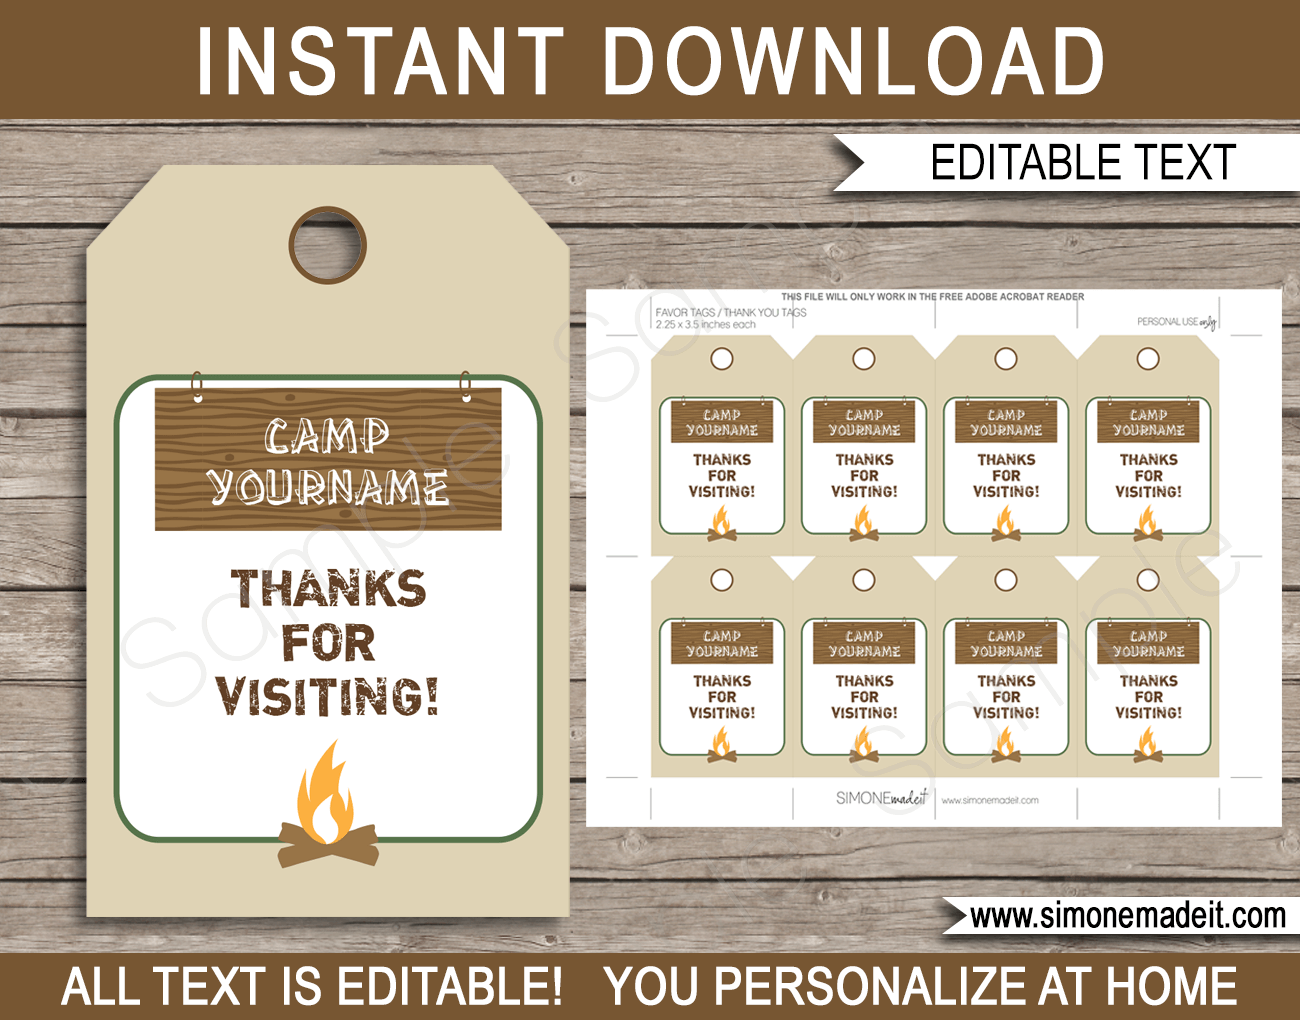 Camping Party Favor Tags | Thank You Tags | Birthday Party | Editable DIY Template | $3.00 INSTANT DOWNLOAD via SIMONEmadeit.com